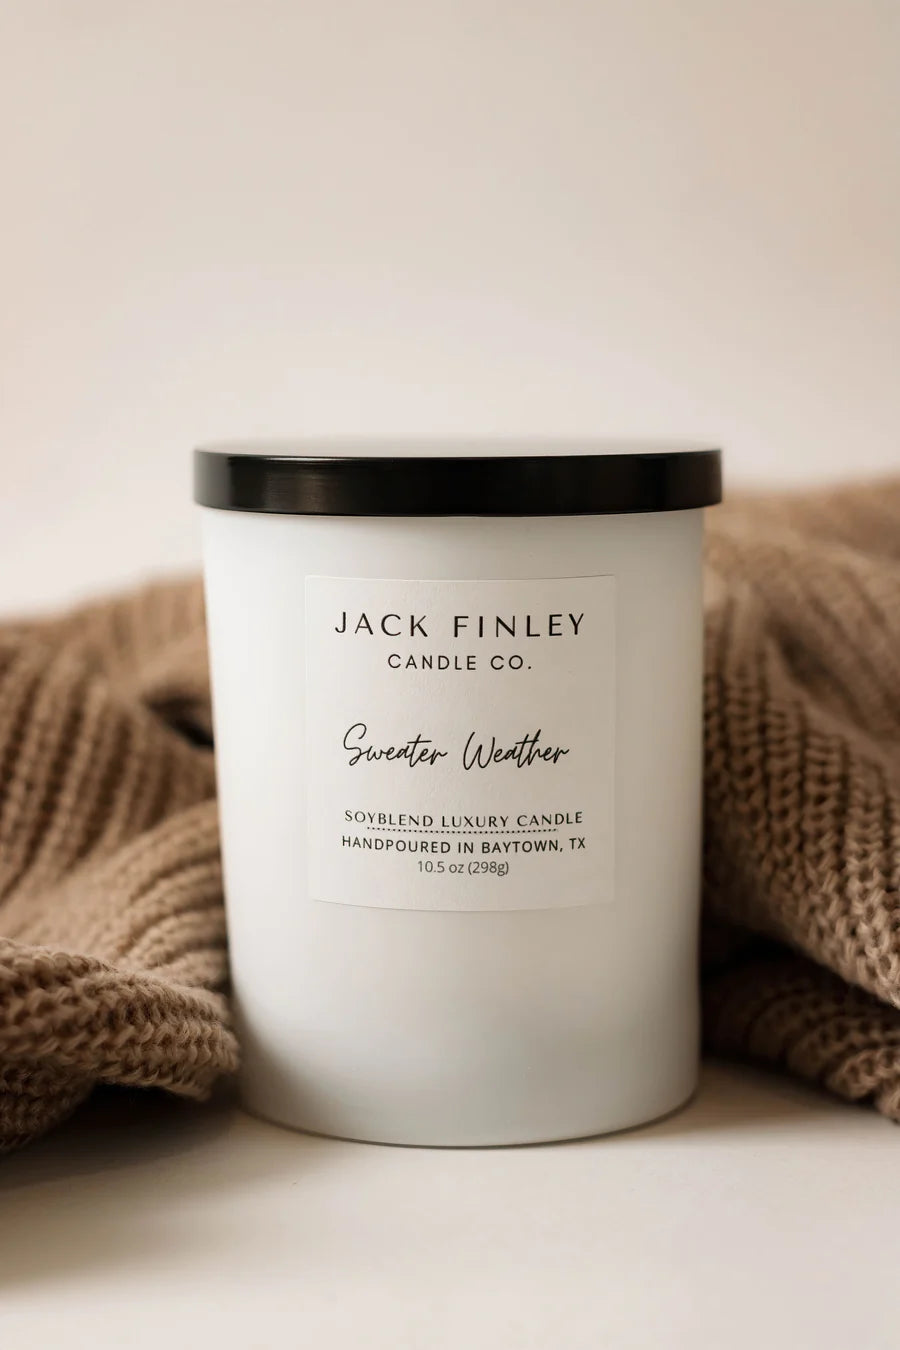 Sweater Weather x Jack Finley